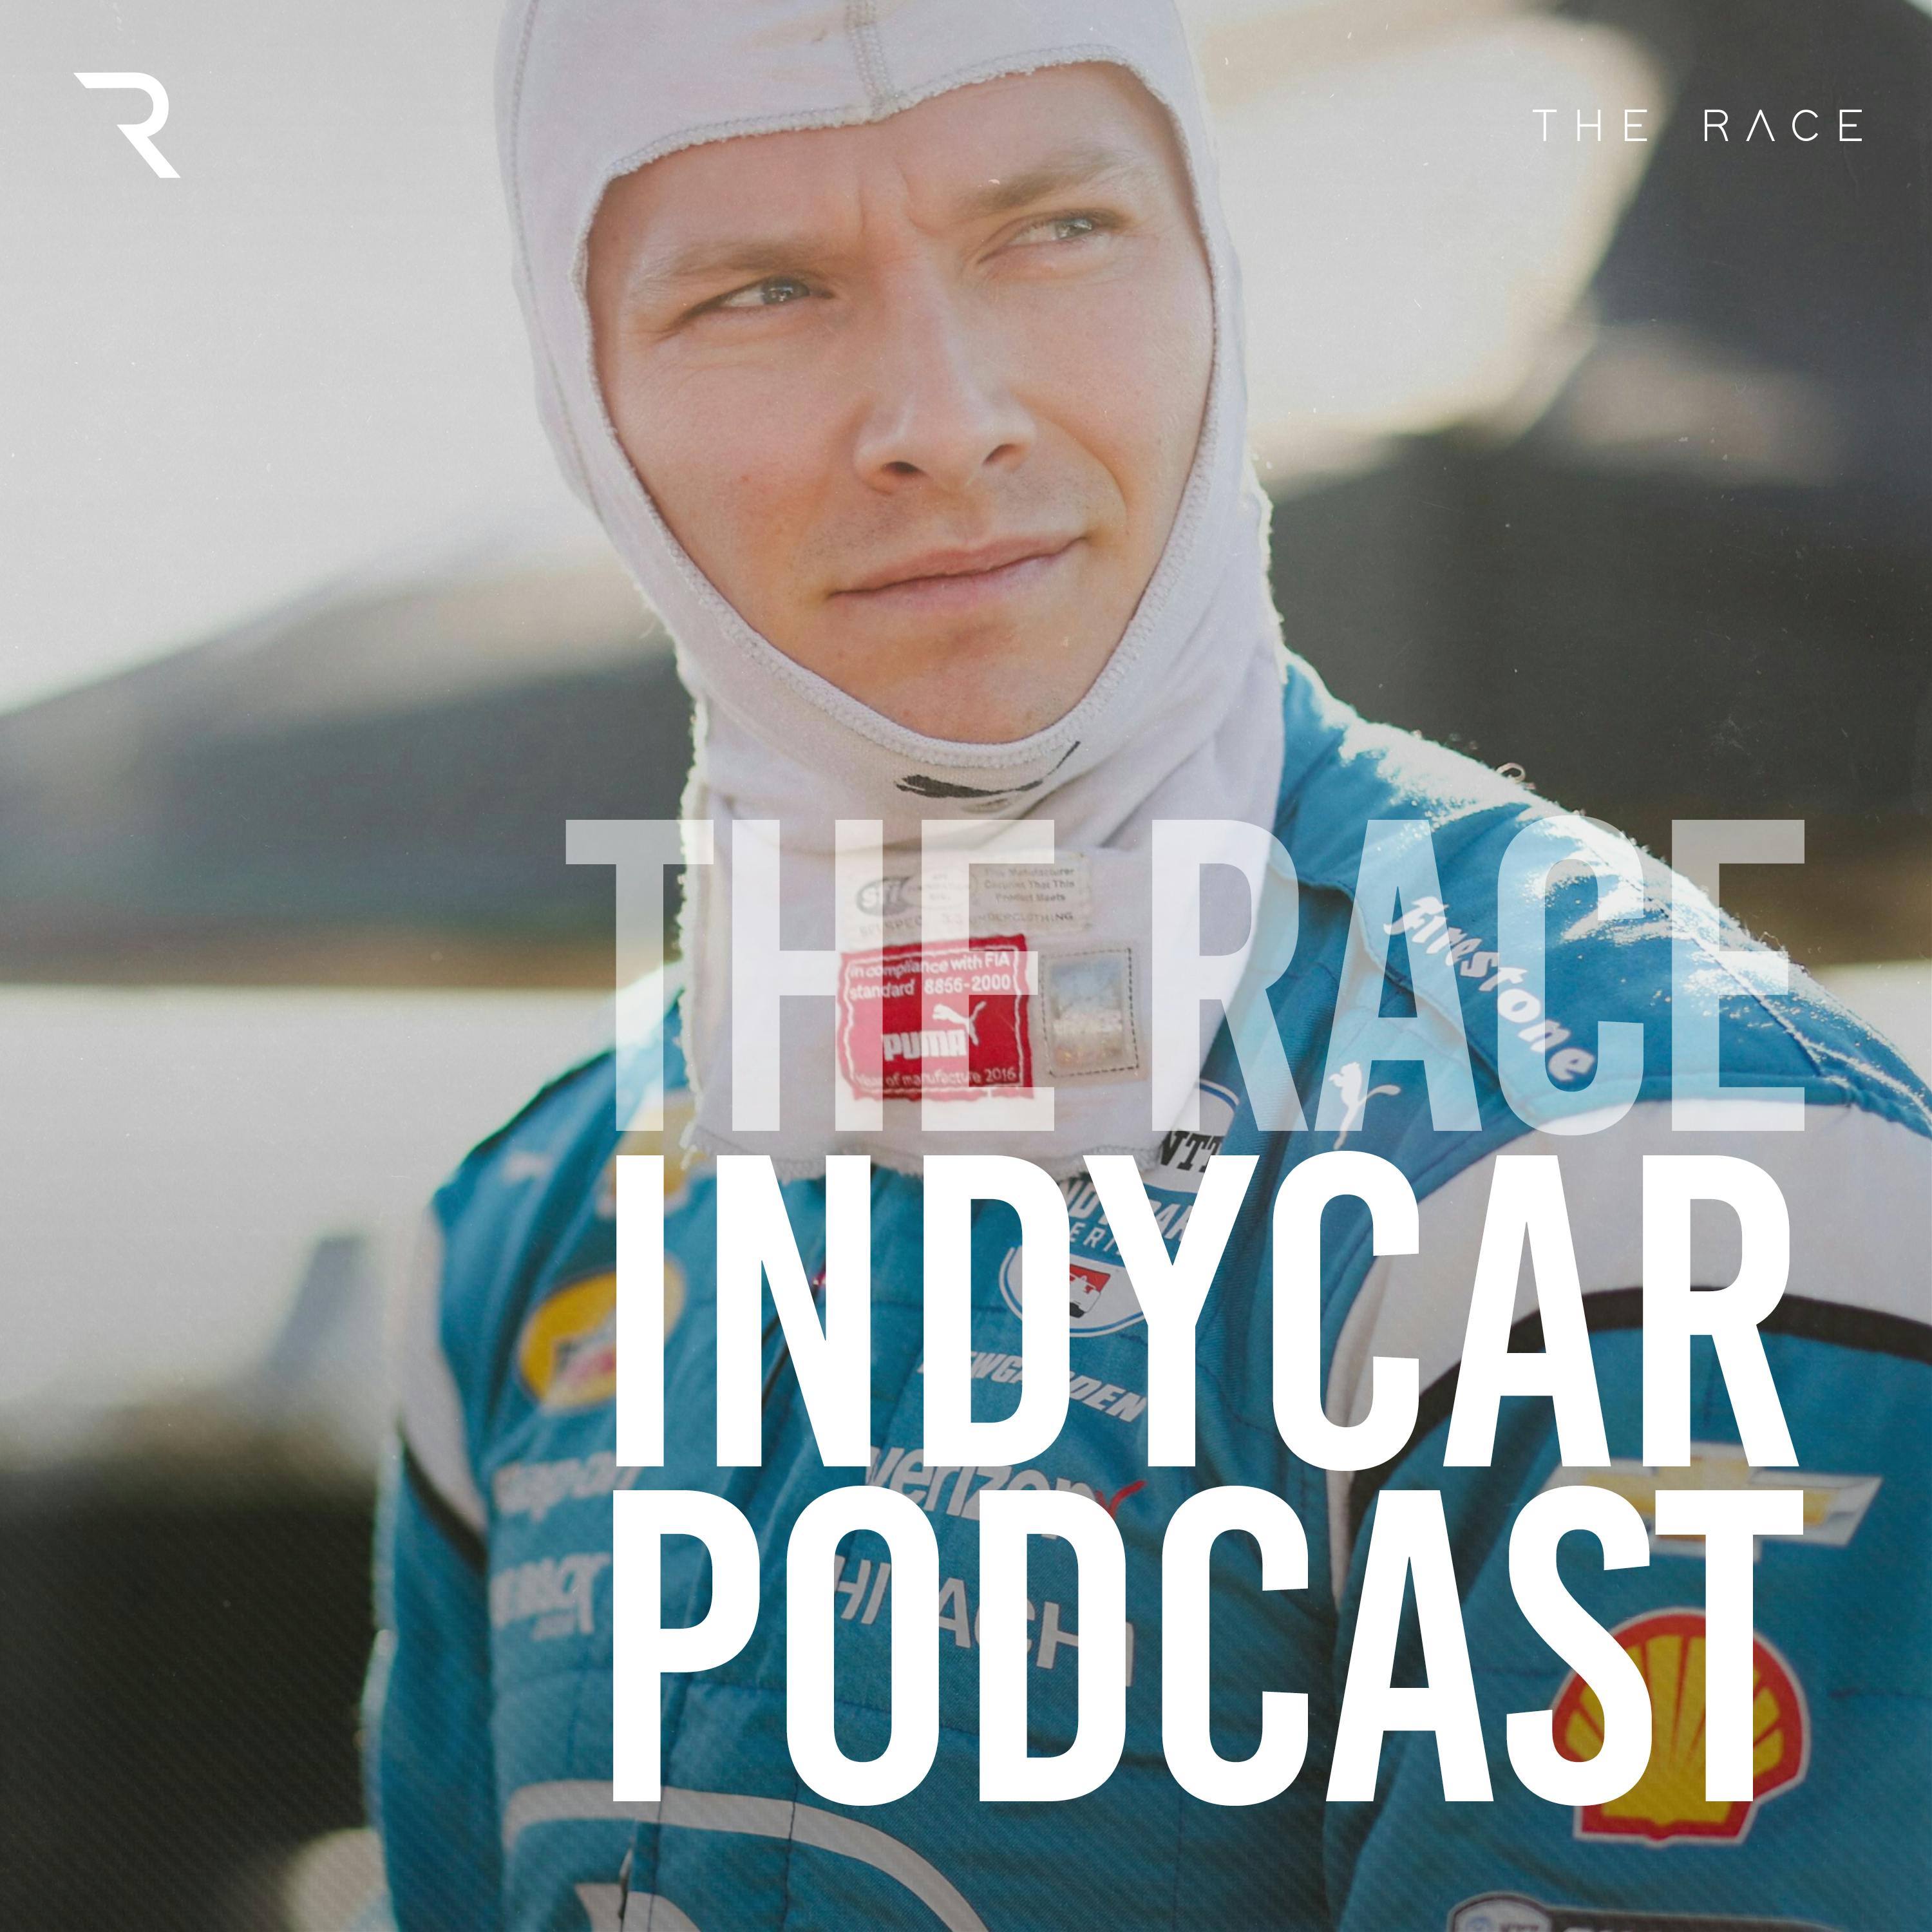 Josef Newgarden on mental struggles, Penske's perfect start and Thermal preview